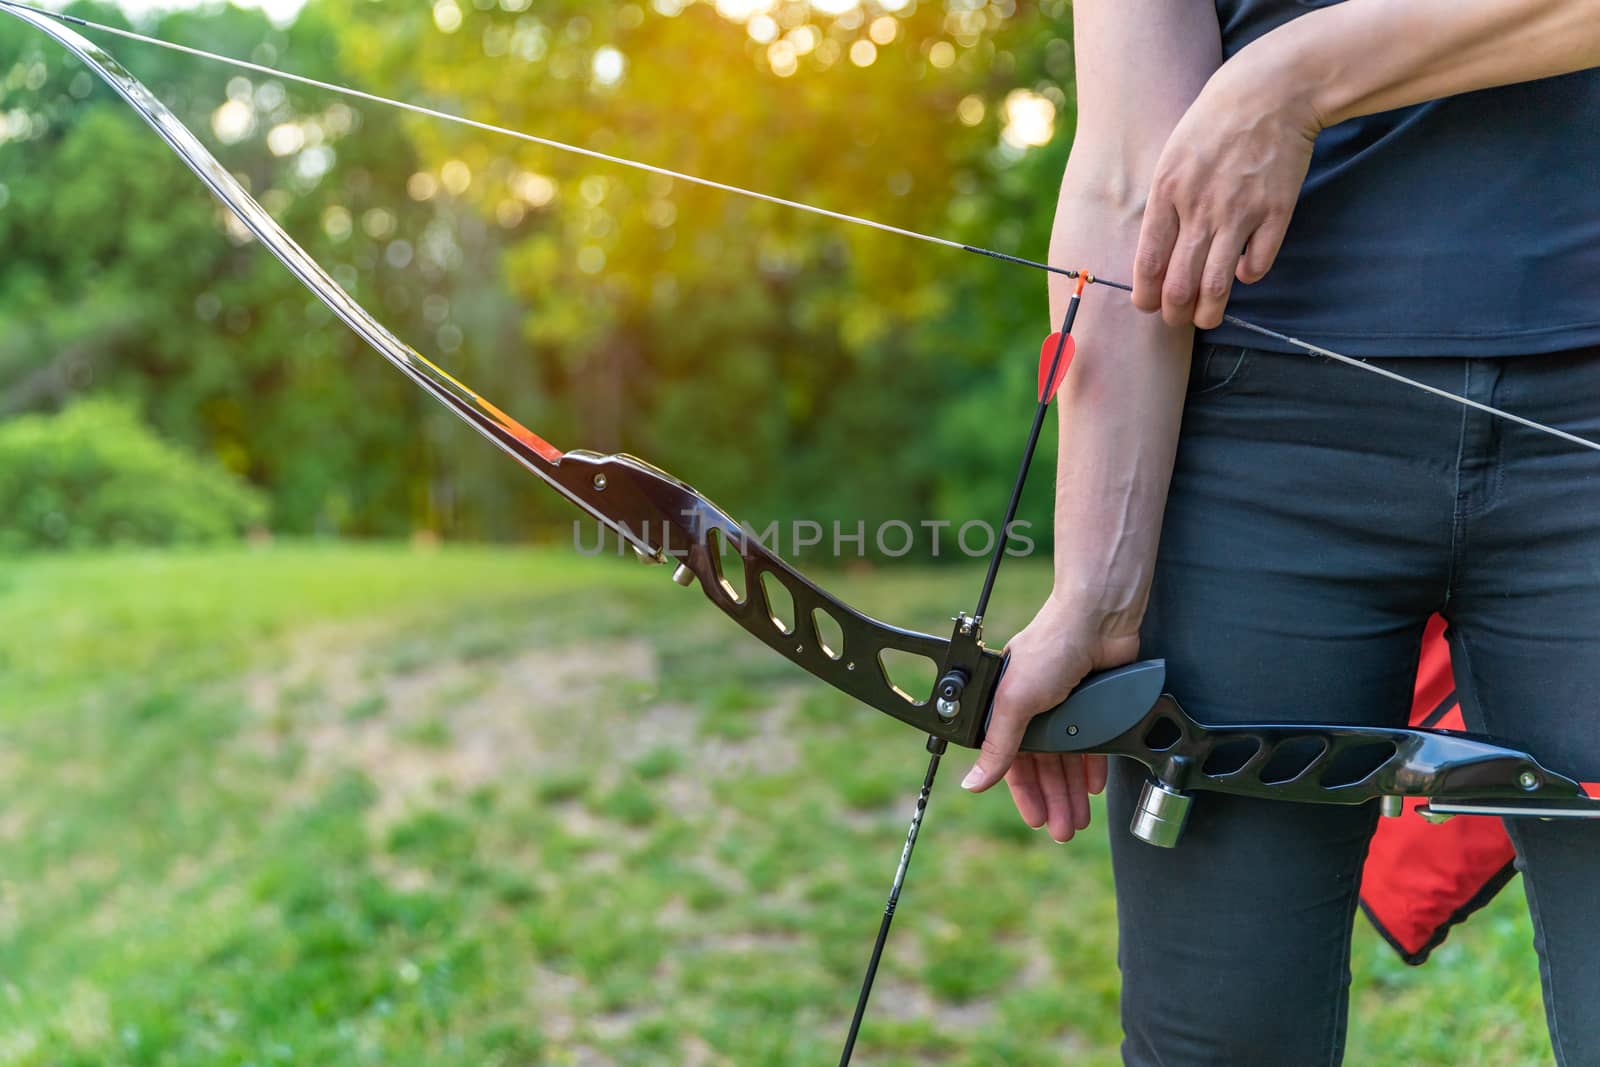 stretching an arrow in a bow during archery in nature by Edophoto